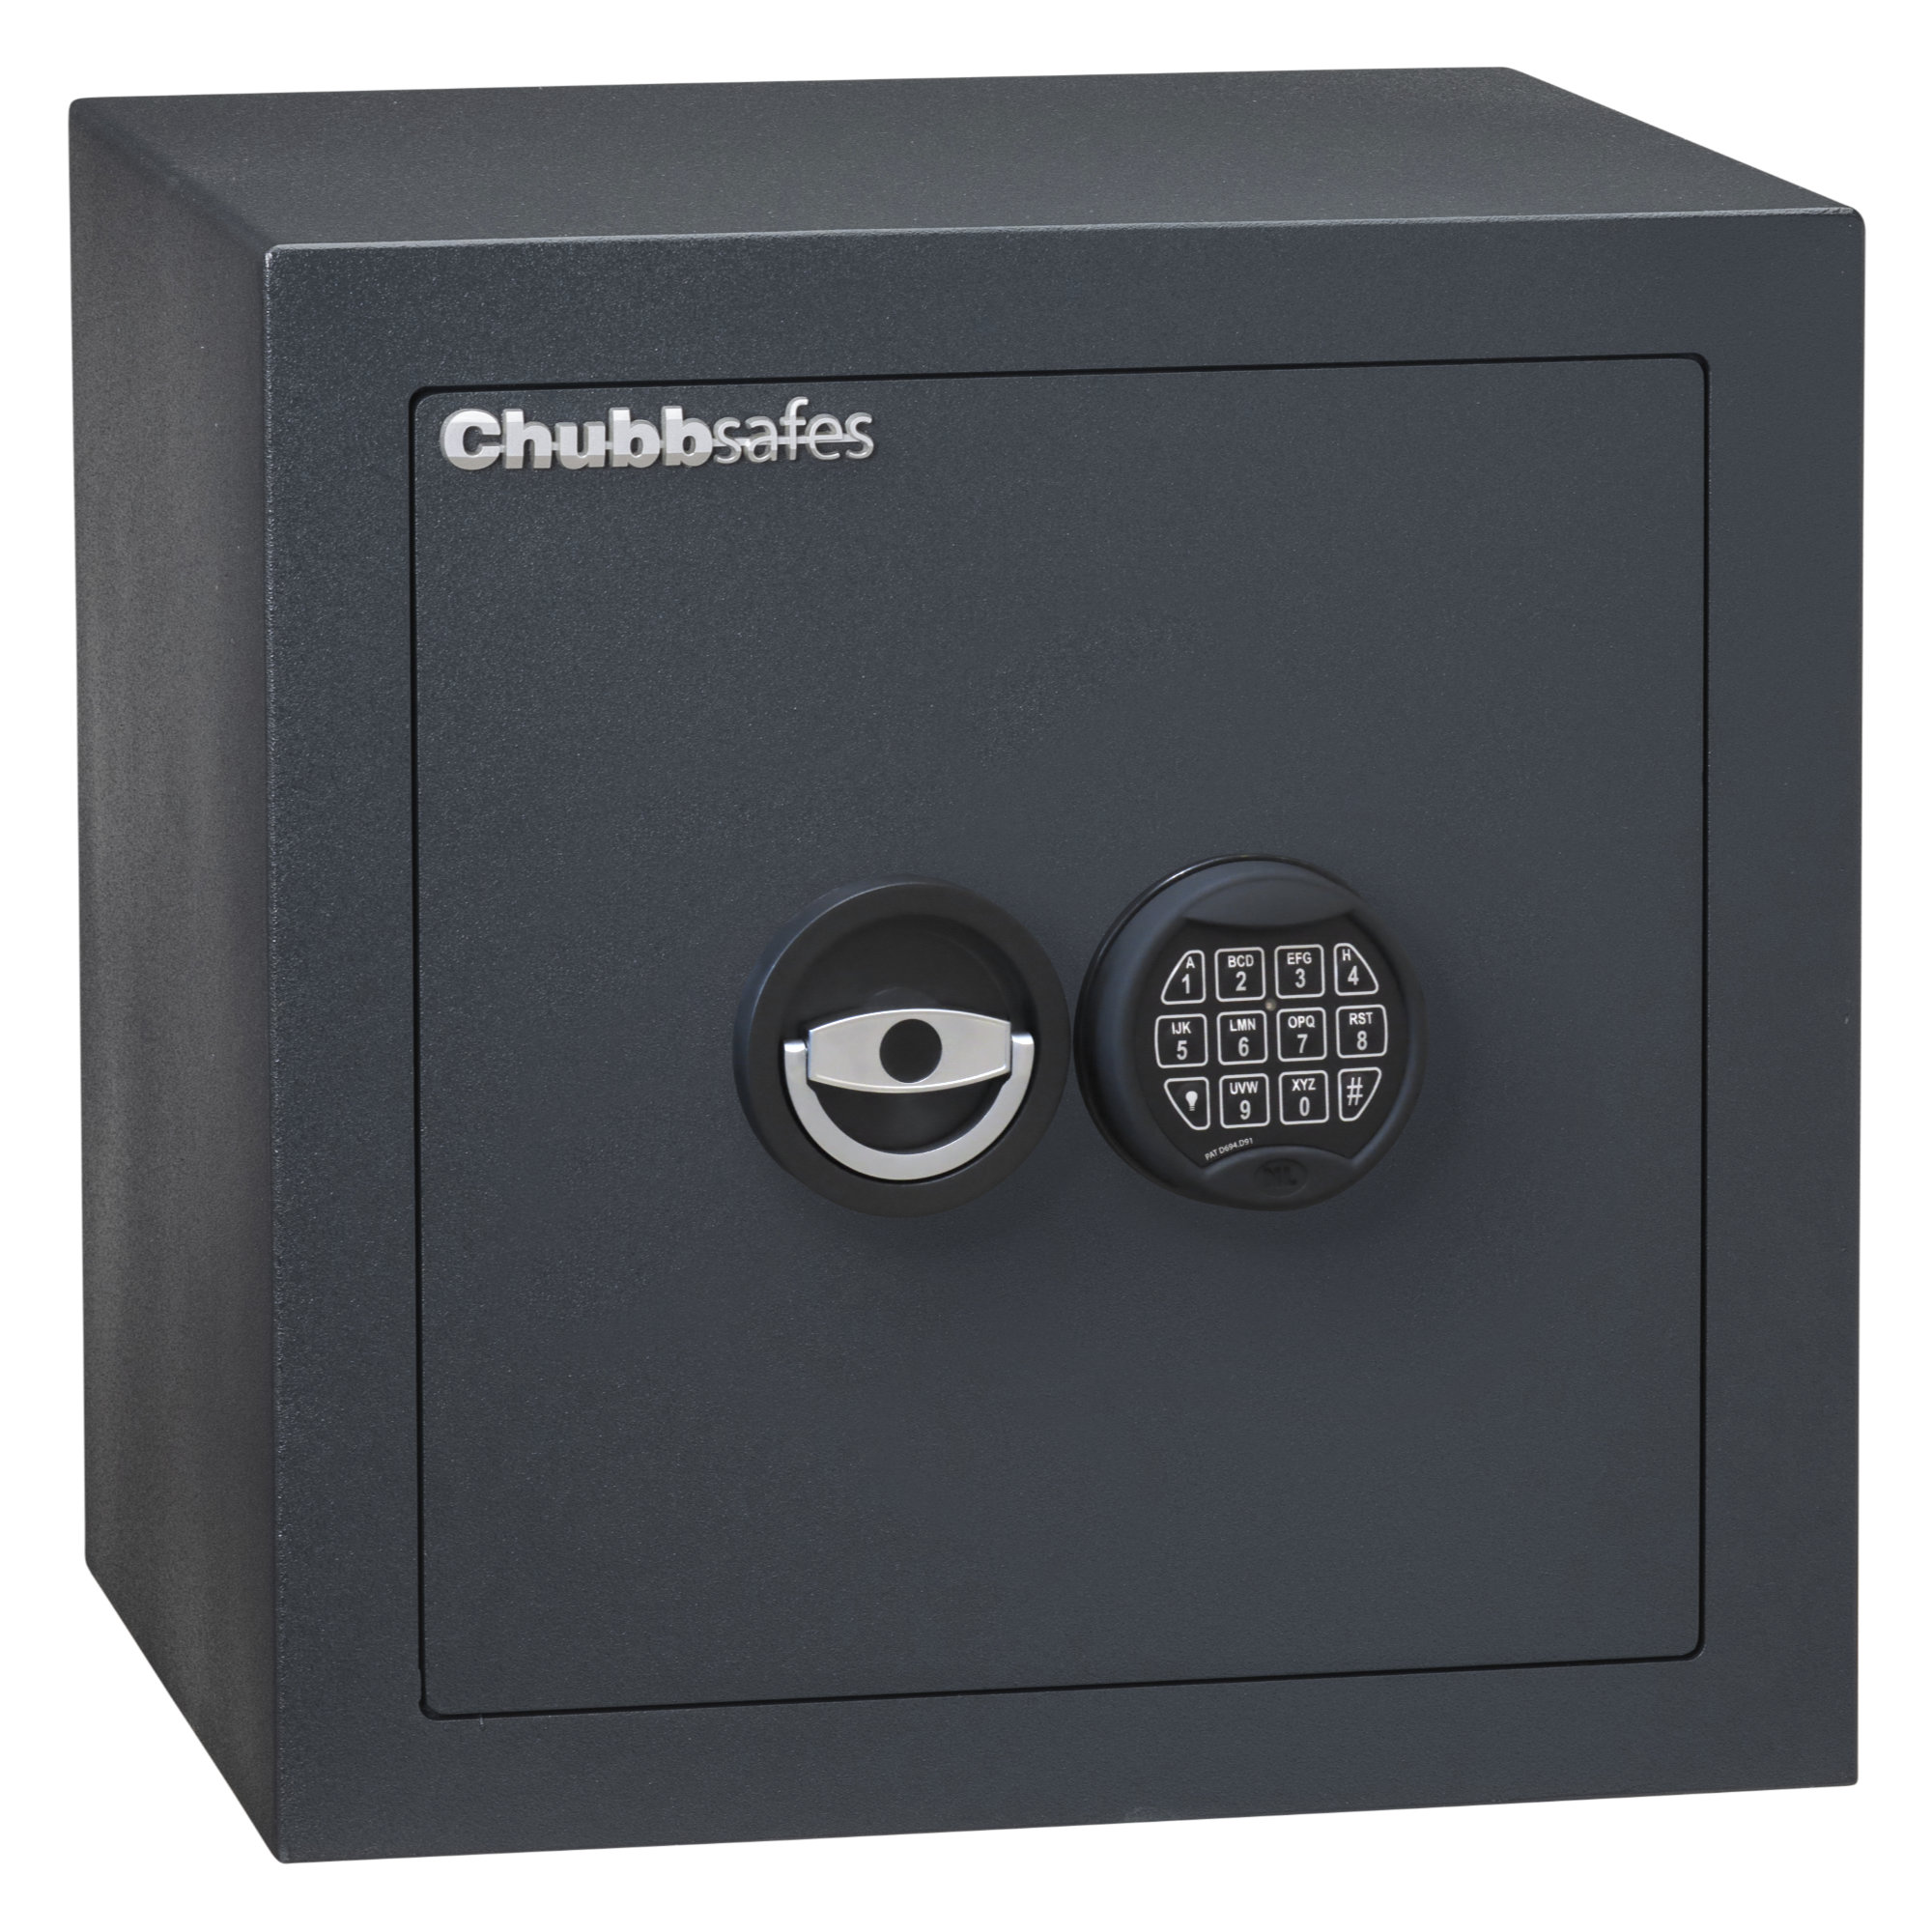 Chubbsafes zeta grade 1 size 40e security safe for the home or office safe with high security electronic lock.